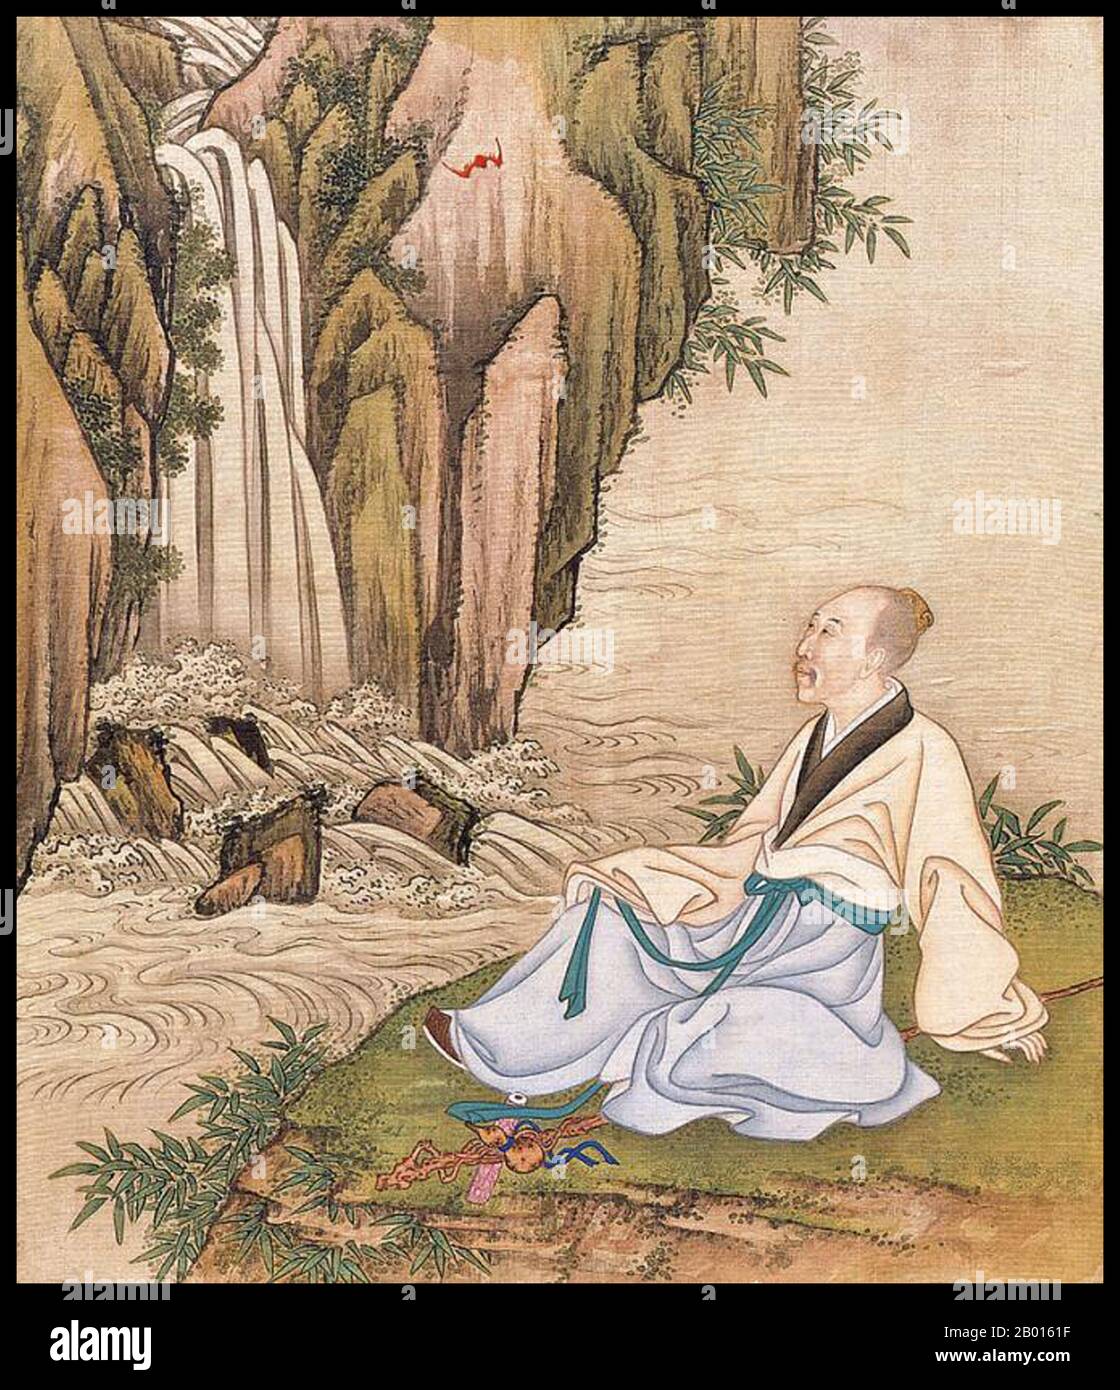 China: Emperor Yongzheng (13 December 1678 – 8 October 1735), 5th ruler of the Qing Dynasty (r. 1722-1735), relaxing by a waterfall. Album leaf painting, c. 1723-1735.  The Yongzheng Emperor, born Yinzhen and temple name Shizong, was the fifth emperor of the Qing Dynasty. A hard-working ruler, Yongzheng's main goal was to create an effective government at minimum expense. Like his father, the Kangxi Emperor, Yongzheng used military force in order to preserve the dynasty's position. Suspected by historians to have usurped the throne, his reign was often called despotic, efficient, and vigorous. Stock Photo